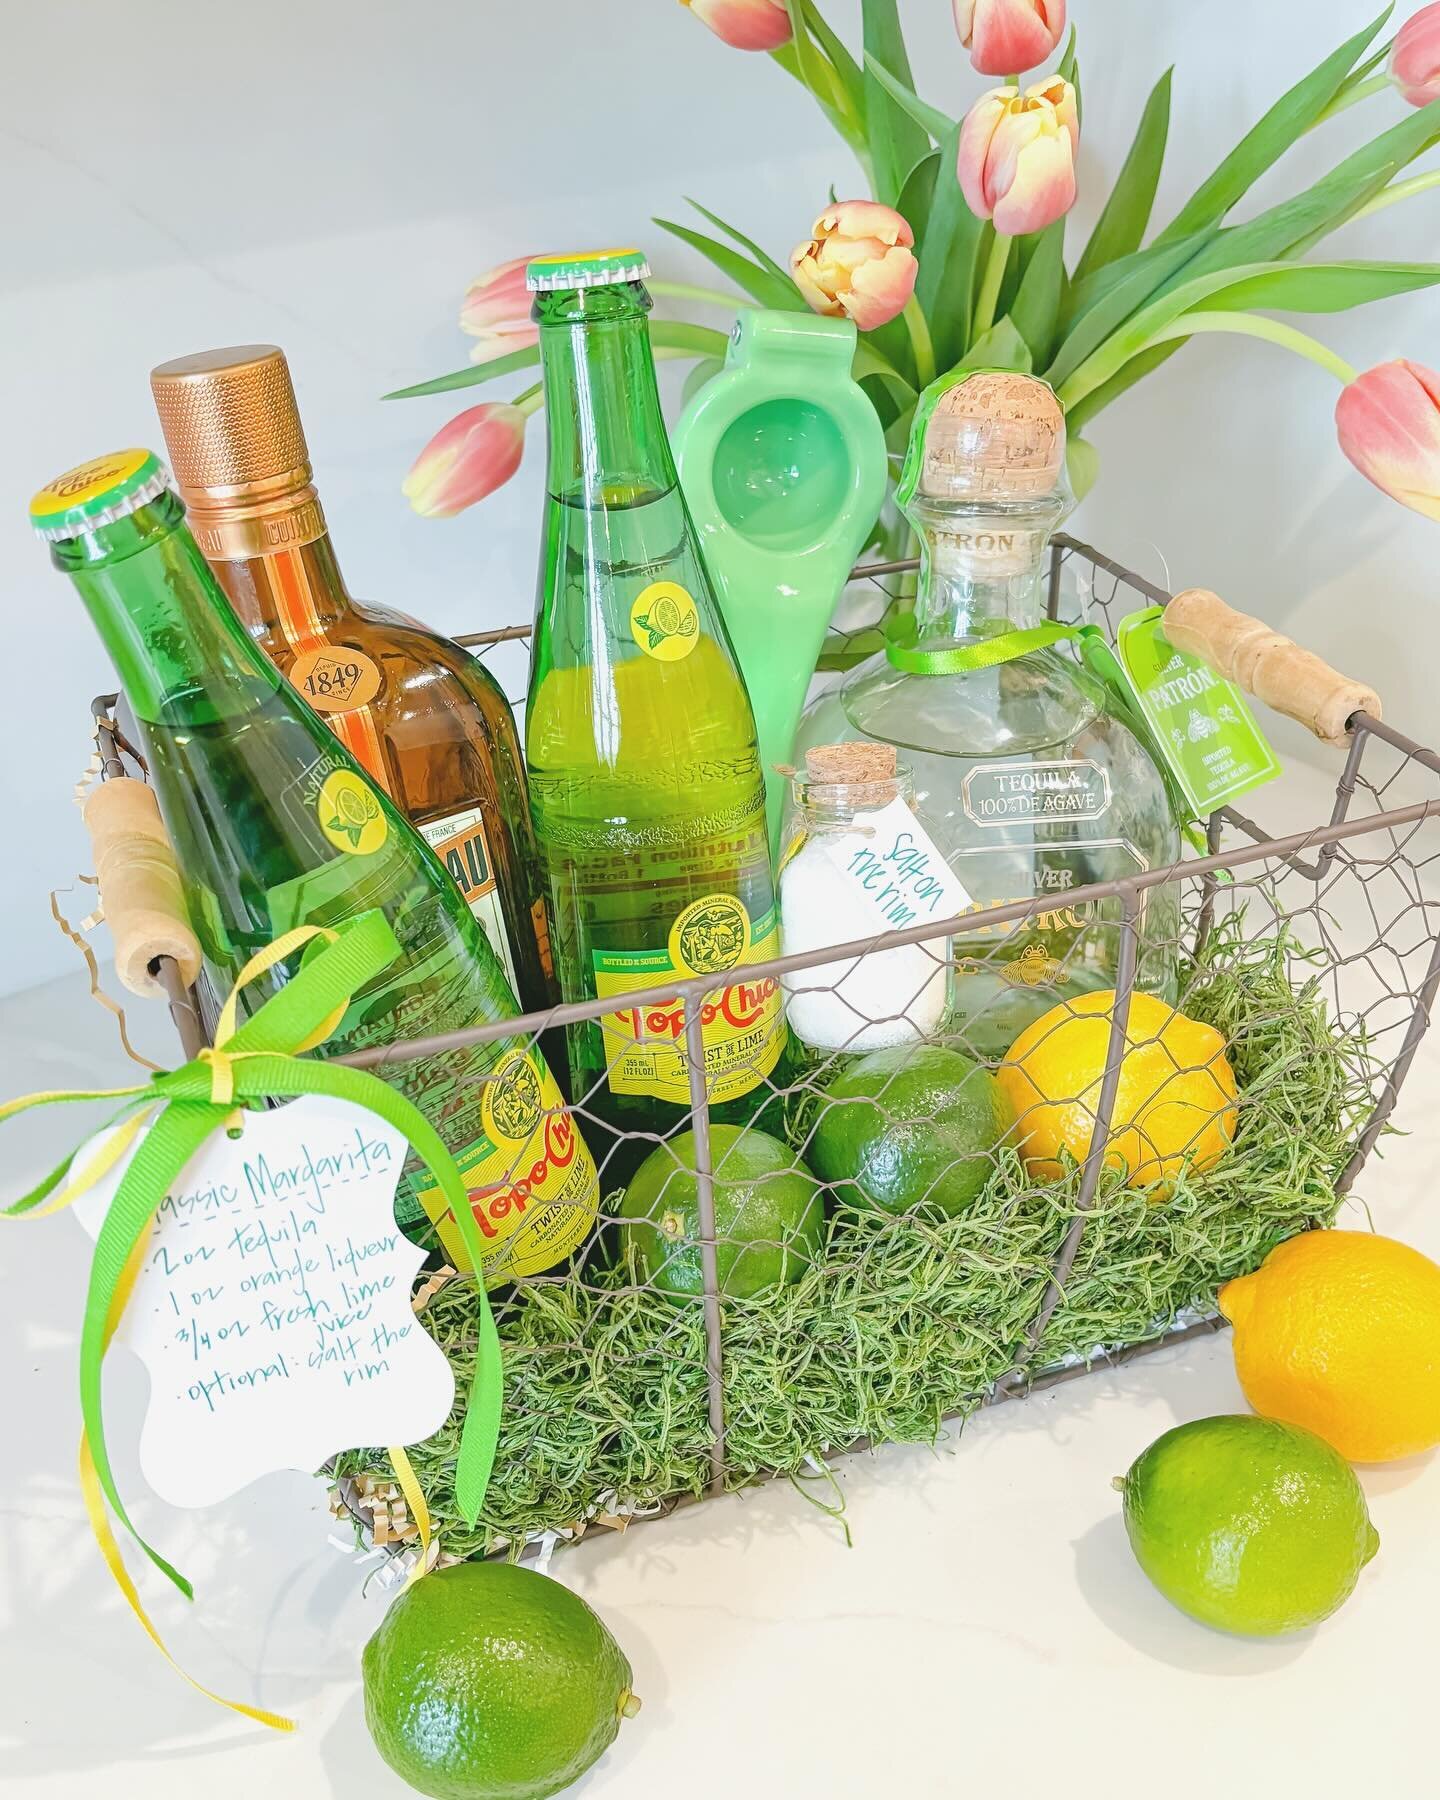 Bringing the party to you this National Margarita Day with the ultimate gift idea: a Margarita Making Kit! 🍹 Get ready to shake, stir, and sip your way to margarita gift perfection with this one! 

Save this idea for Cinco De Mayo or a fun idea for 